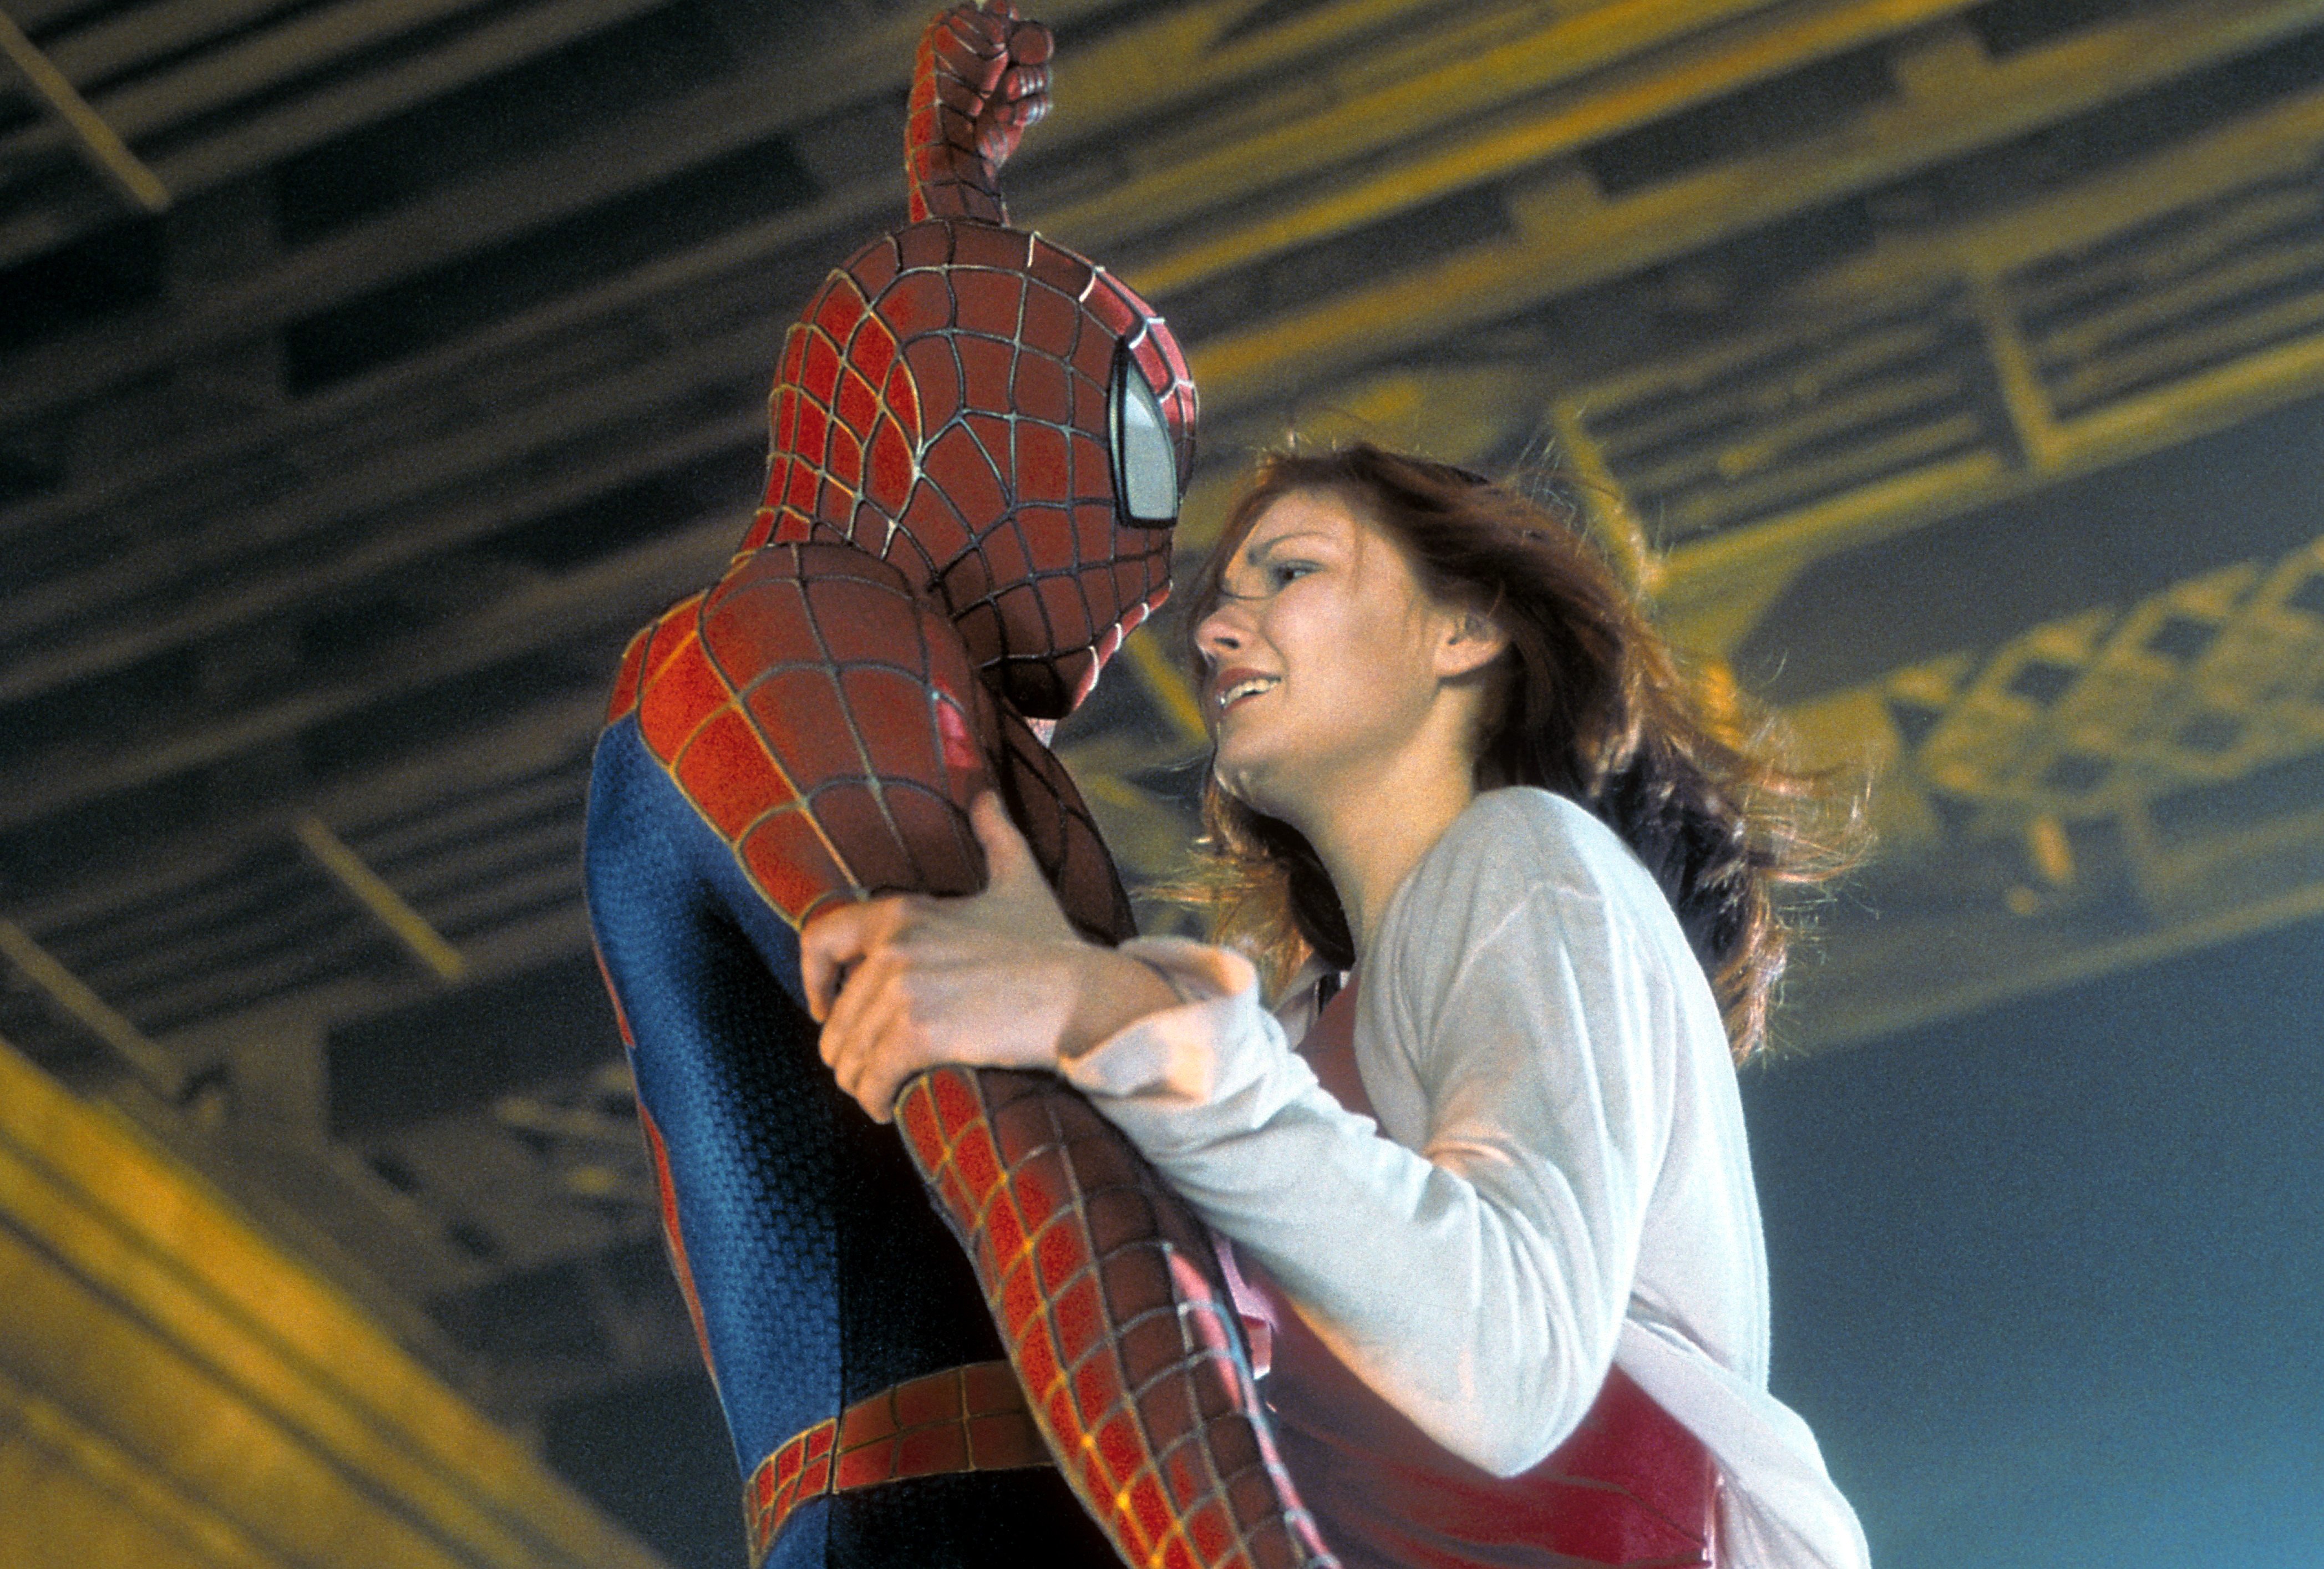 Tobey Maguire playing Spider-Man shares a scene with Kirsten Dunst from the film "Spiderman" in 2002. | Source: Getty Images